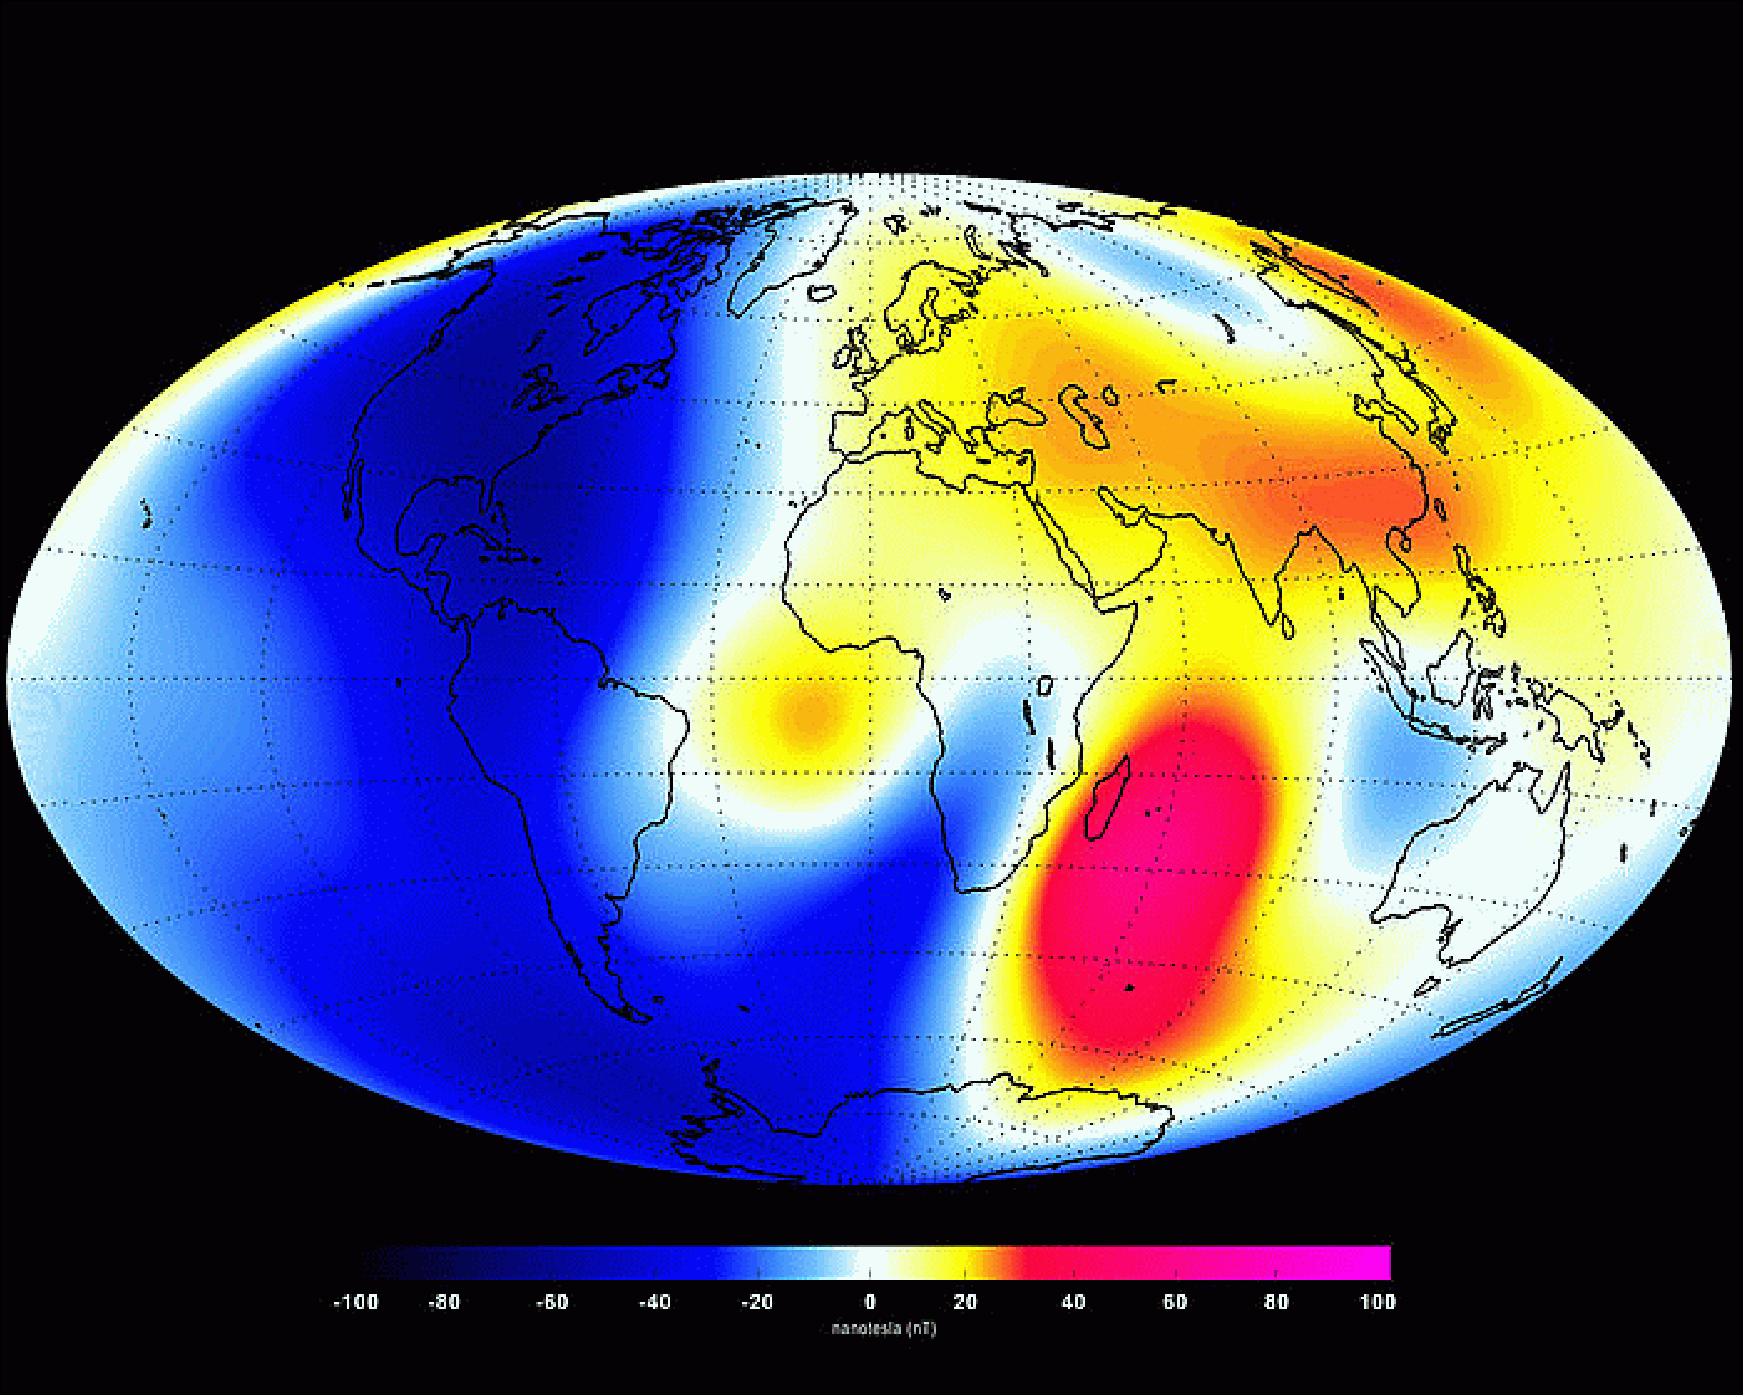 Figure 109: Earth's magnetic field changes from January to June 2014 as measured by the Swarm constellation of satellites (image credit: ESA, DTU Space, Ref.126)